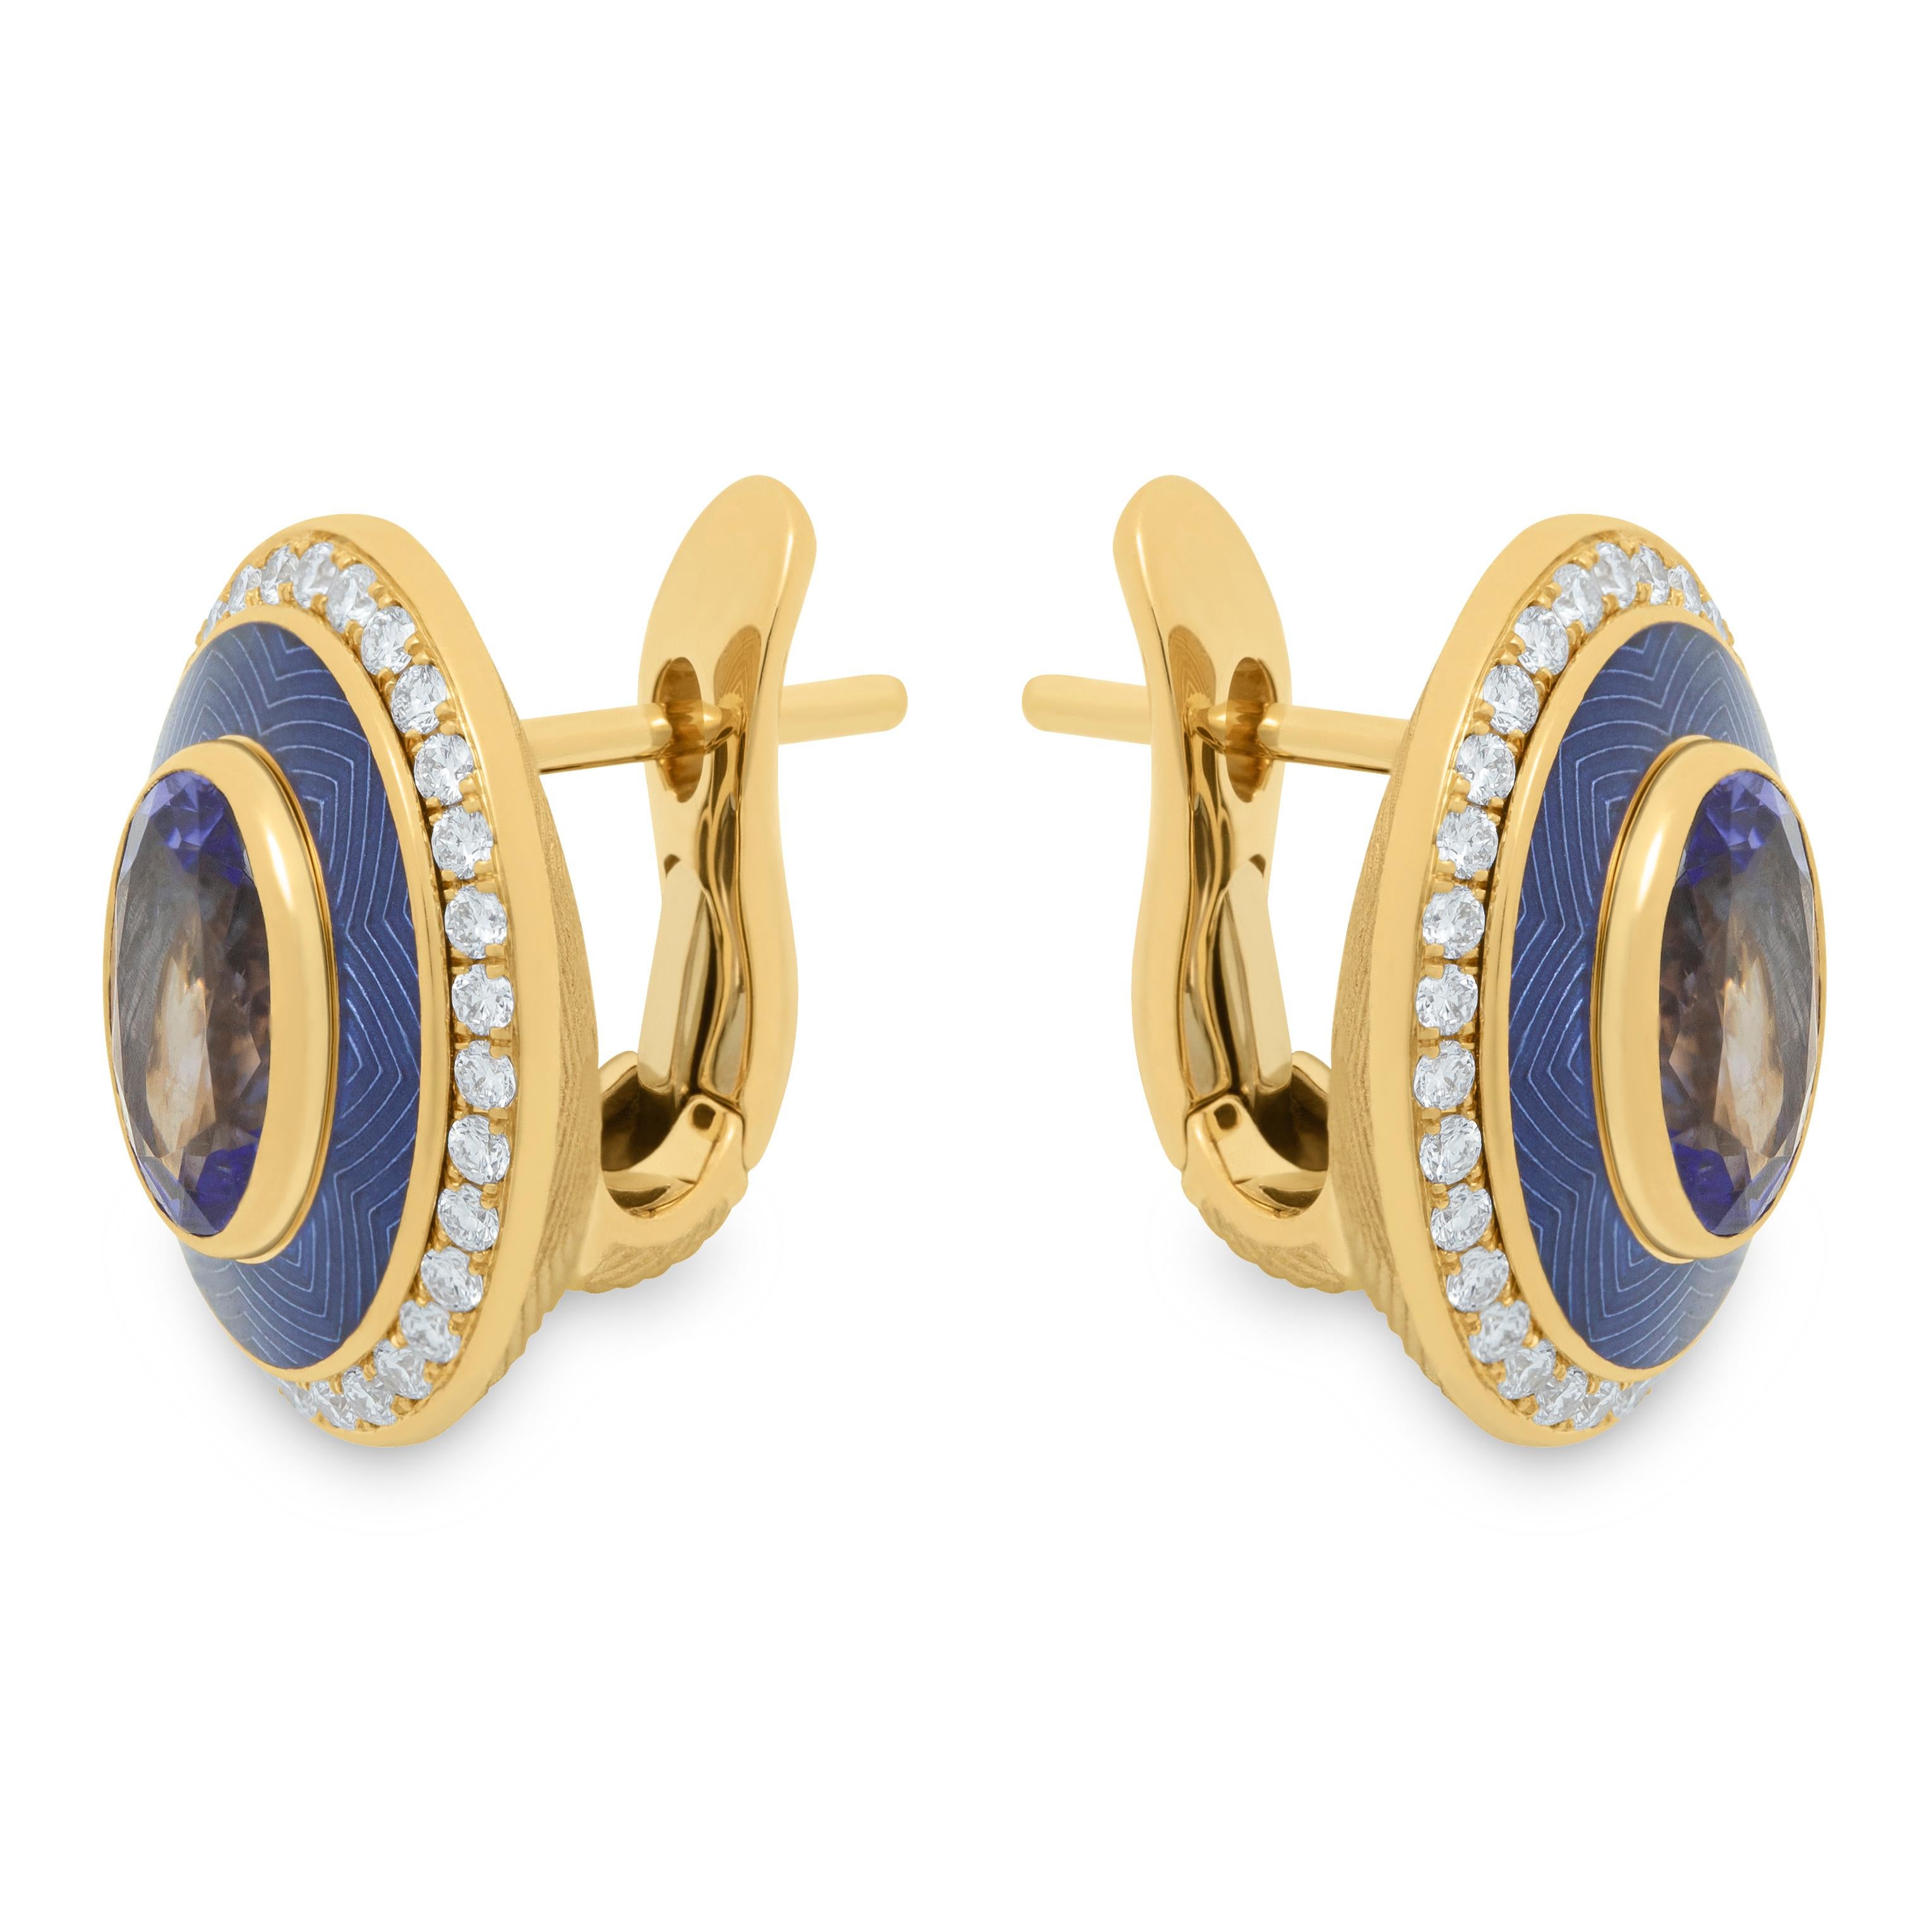 Tanzanite 2.62 Carat Diamonds 18 Karat Yellow Gold Tweed Earrings
Perhaps this is the brightest and most popular representative of the Pret-a-Porter collection. The texture of Tweed reminds of the well-known fabric, but most importantly, it reminds